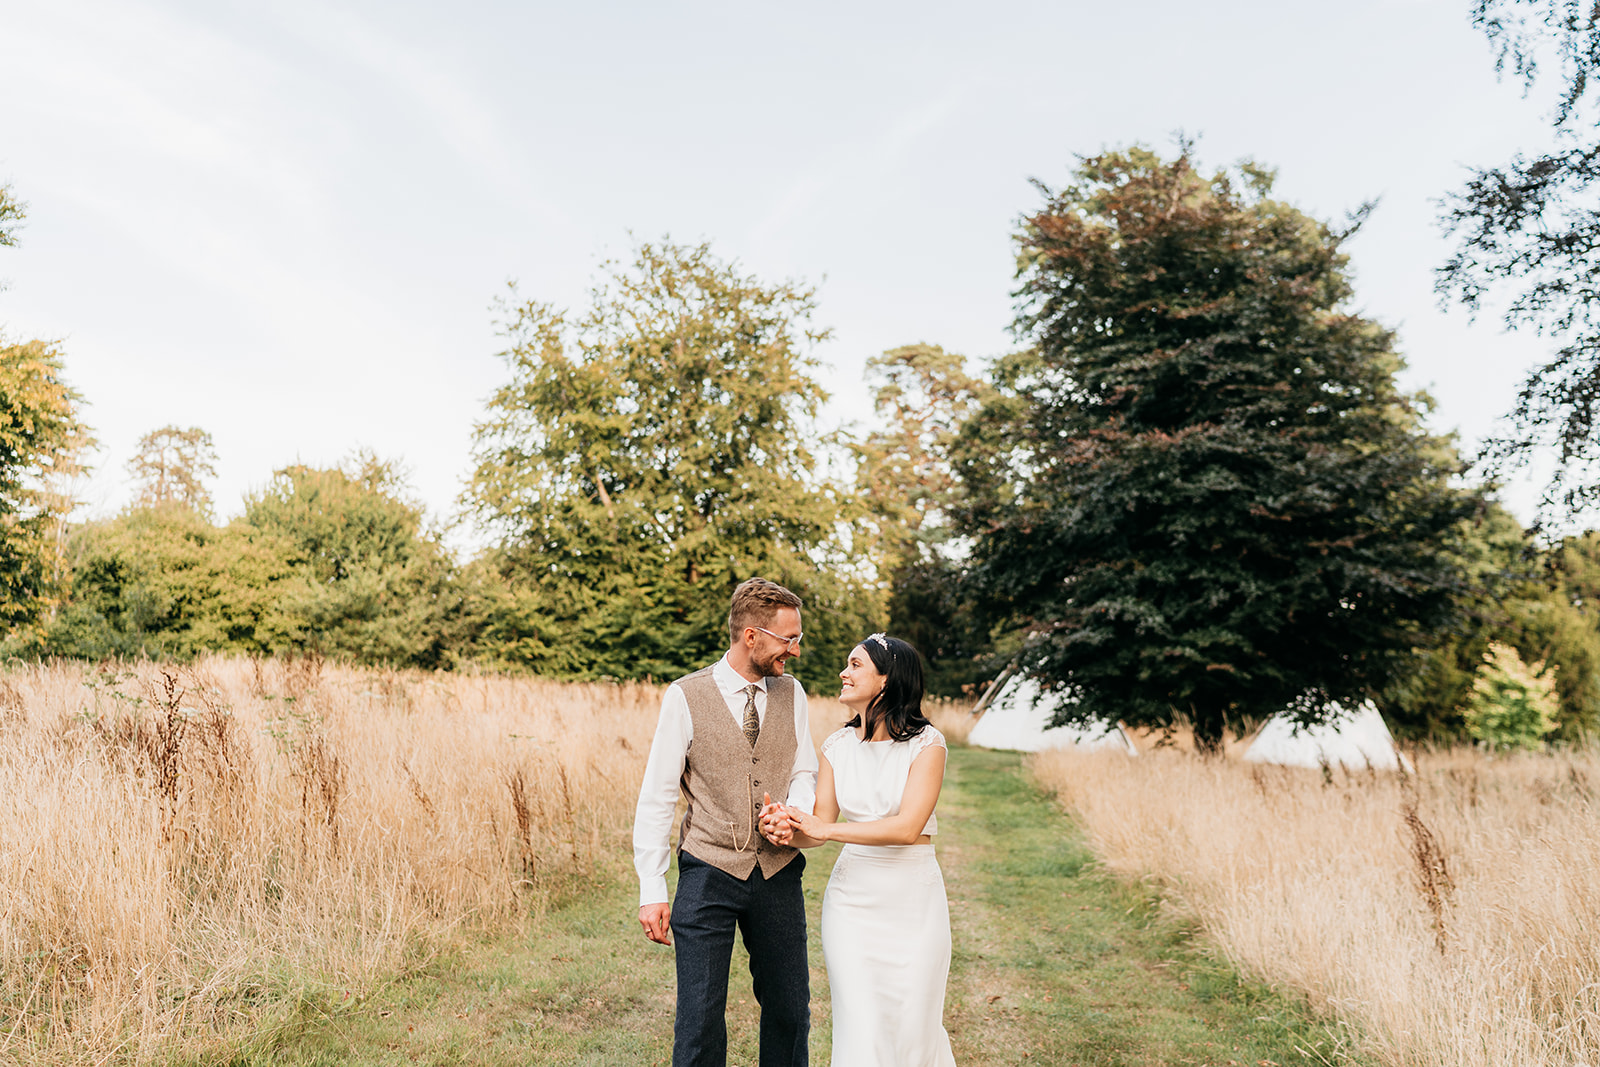 The bride and groom stood in the lovely long grass